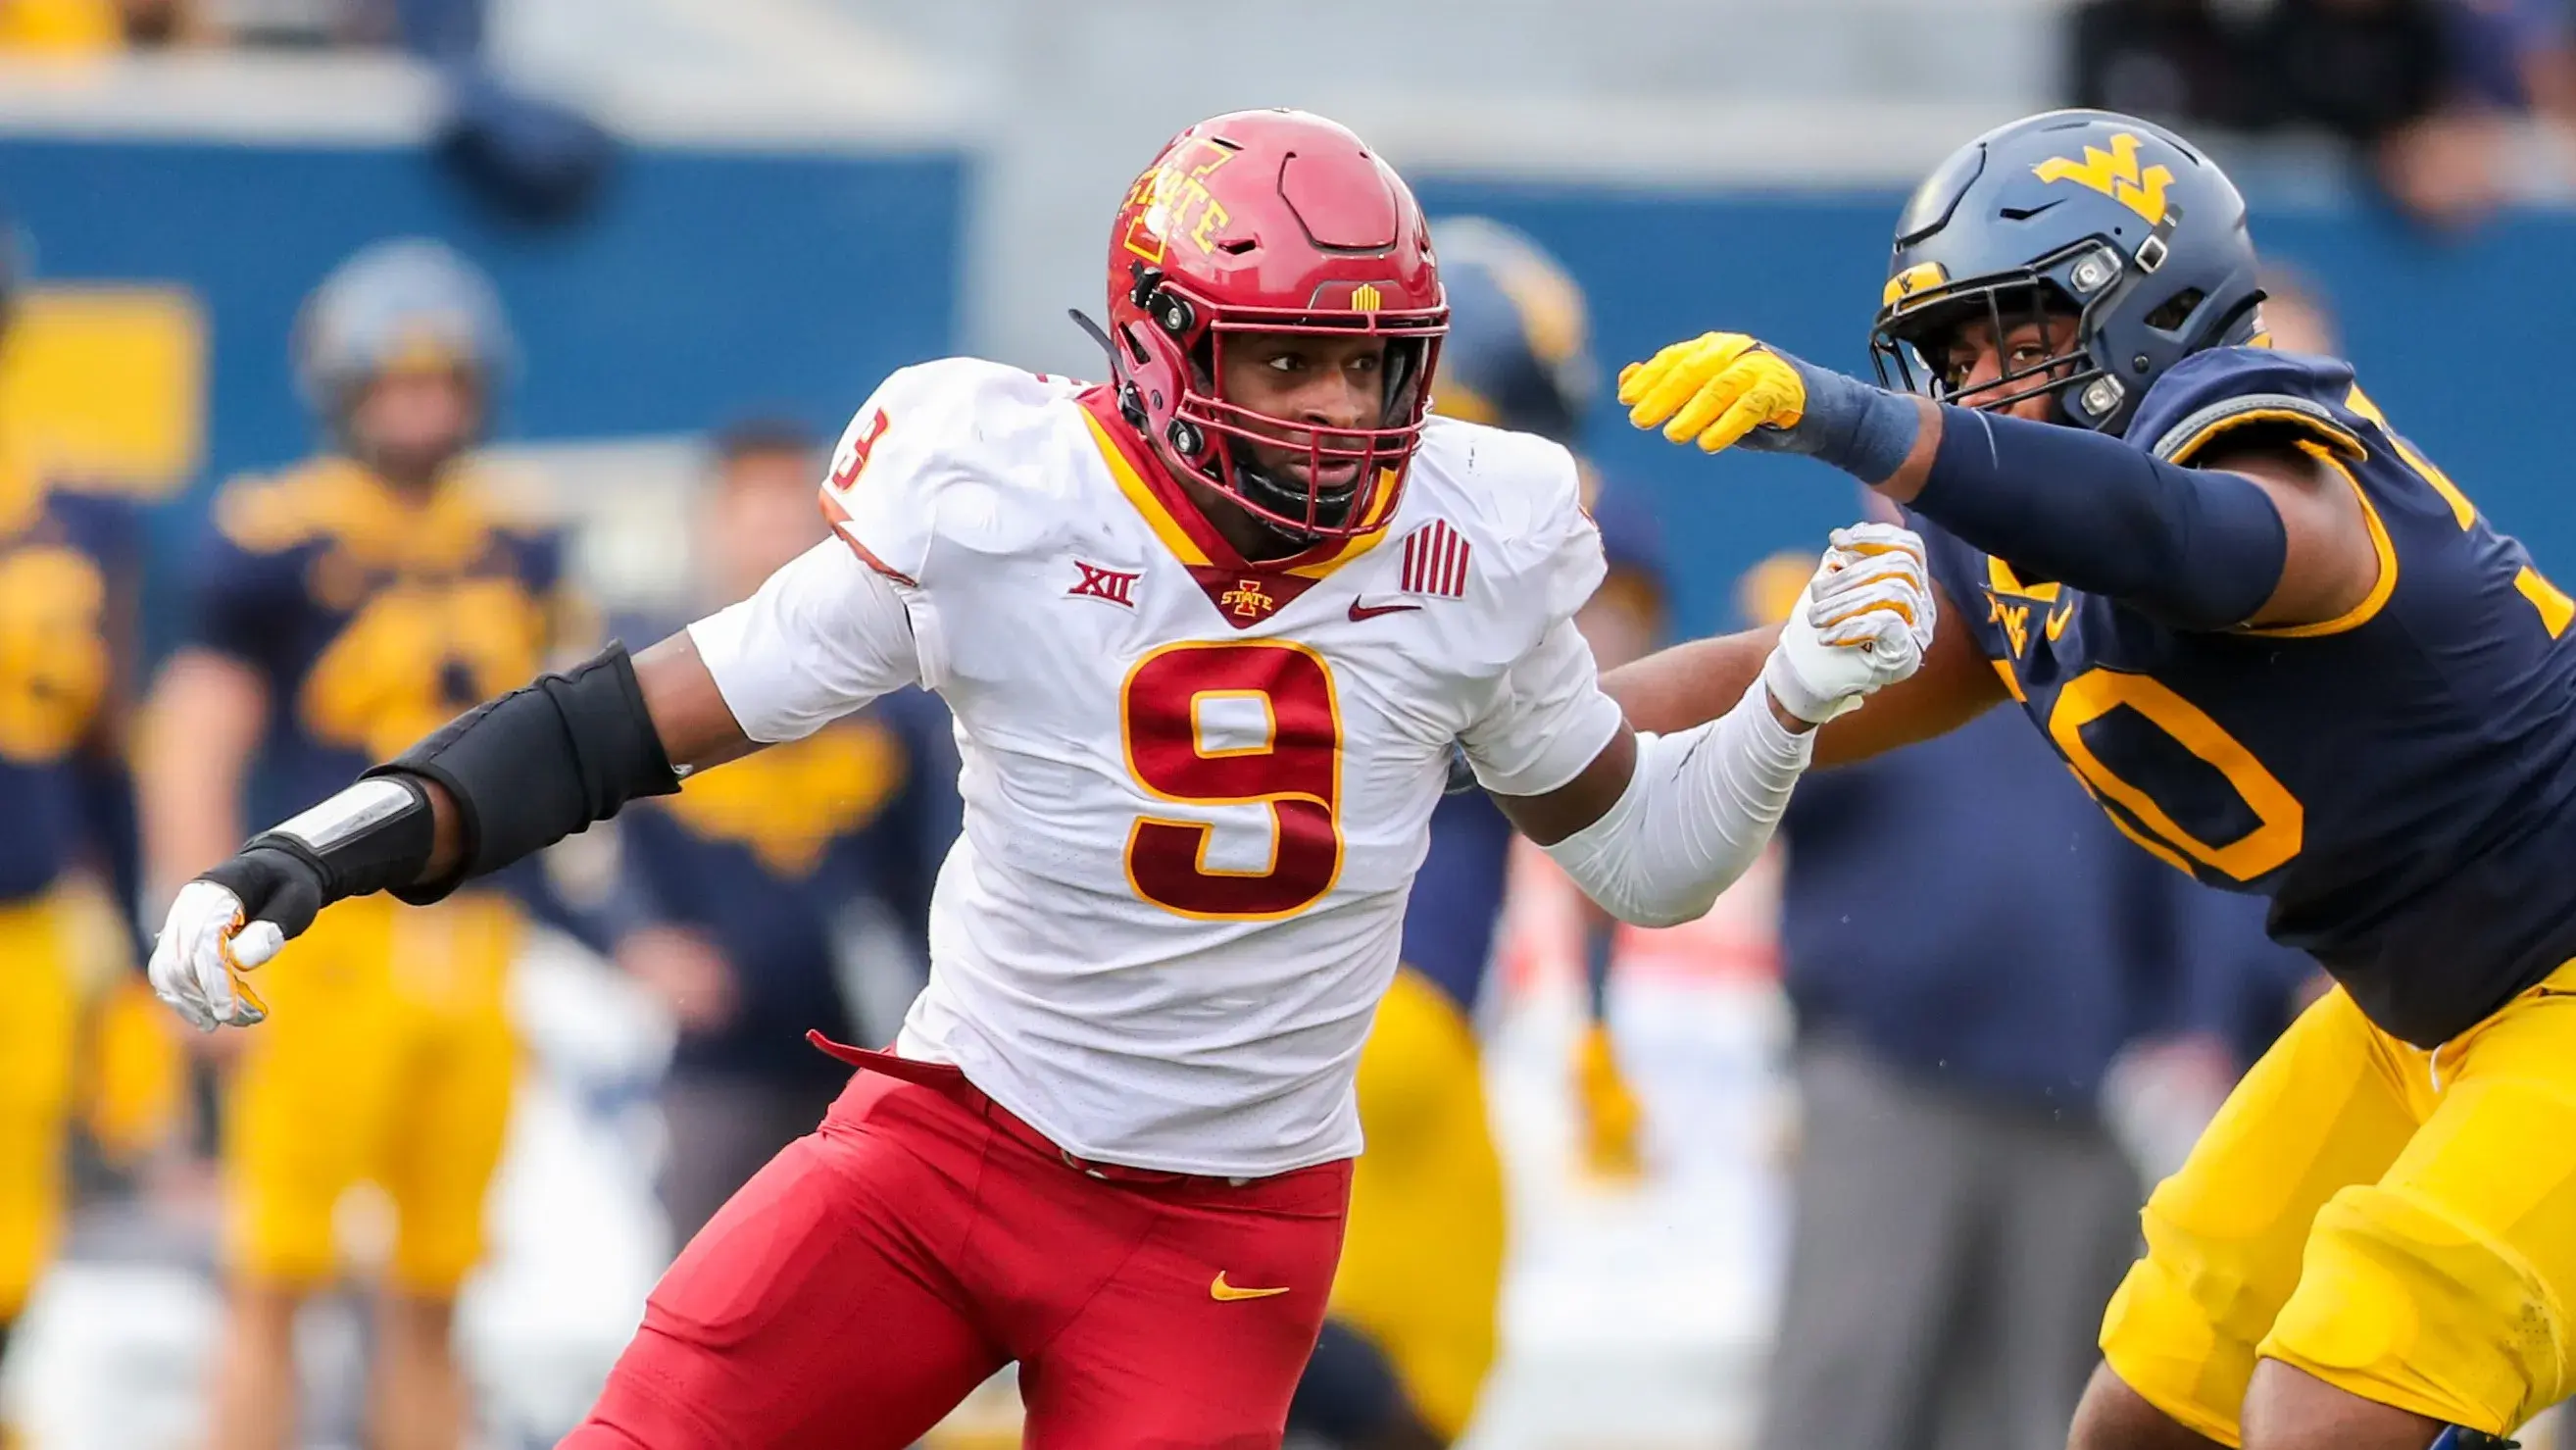 Oct 30, 2021; Morgantown, West Virginia, USA;Iowa State Cyclones defensive end Will McDonald IV (9) during the third quarter against the West Virginia Mountaineers at Mountaineer Field at Milan Puskar Stadium. / Ben Queen-USA TODAY Sports